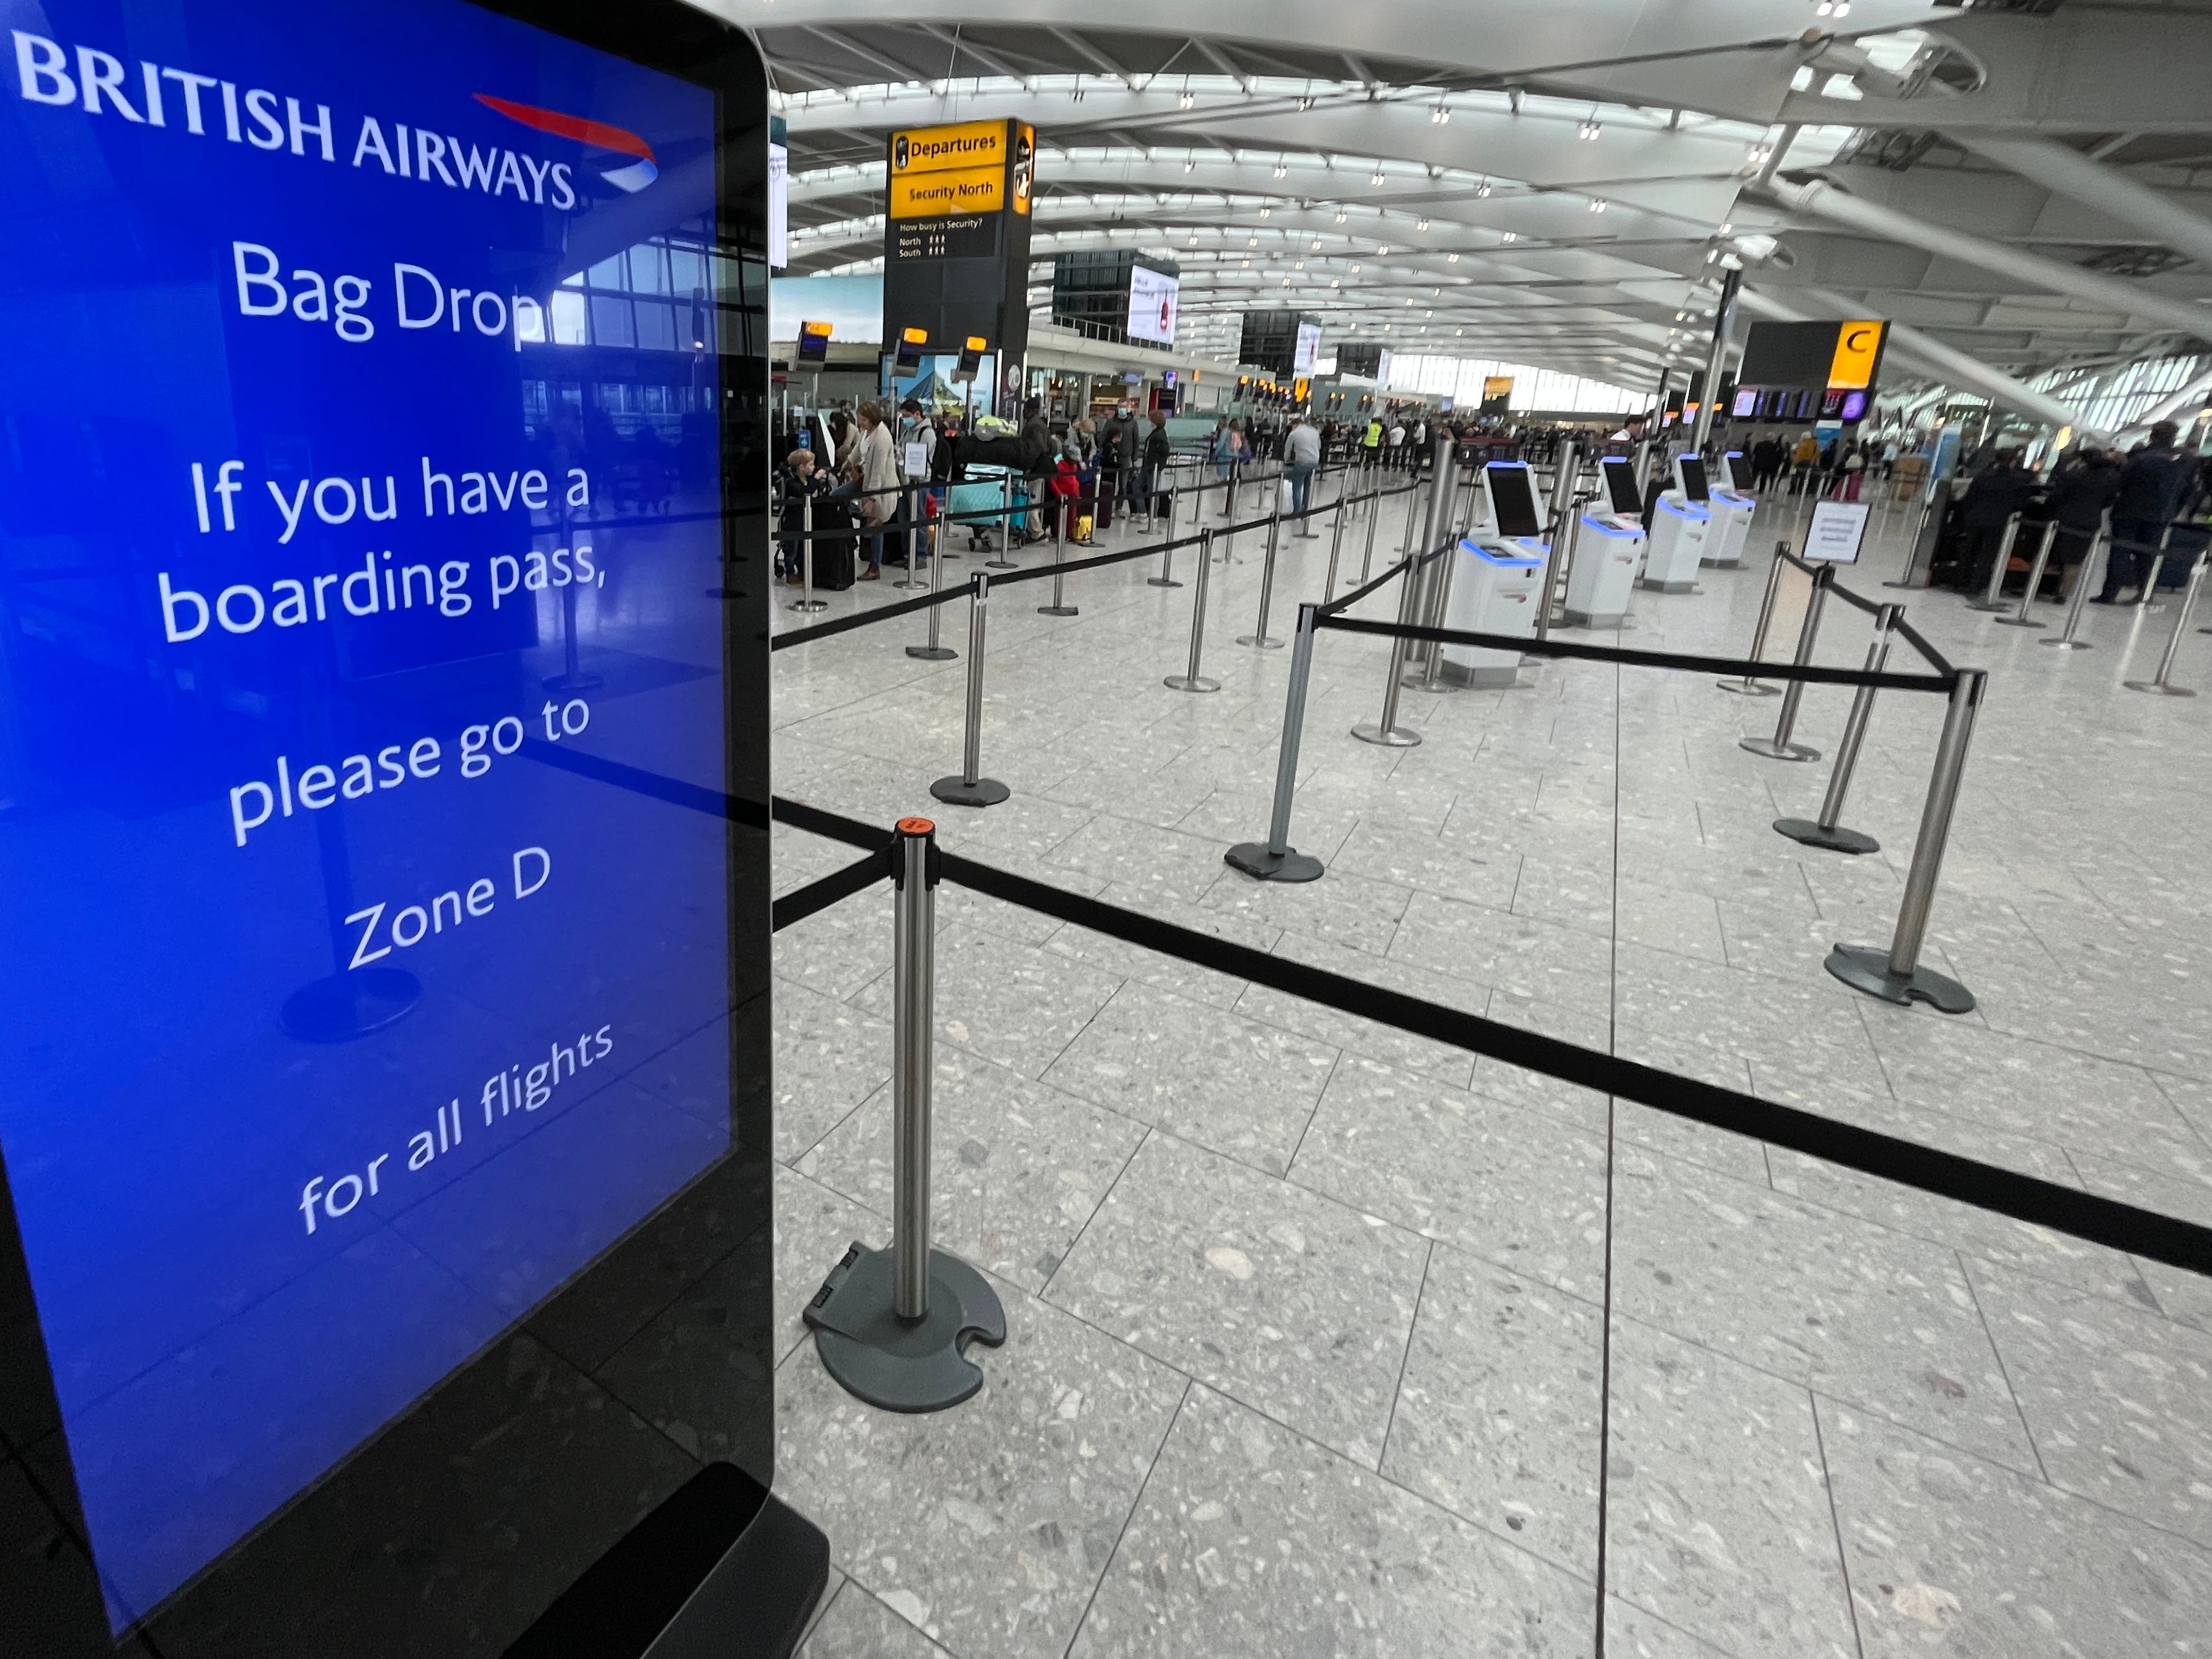 No traveller wants to see the dreaded word up on the departure board